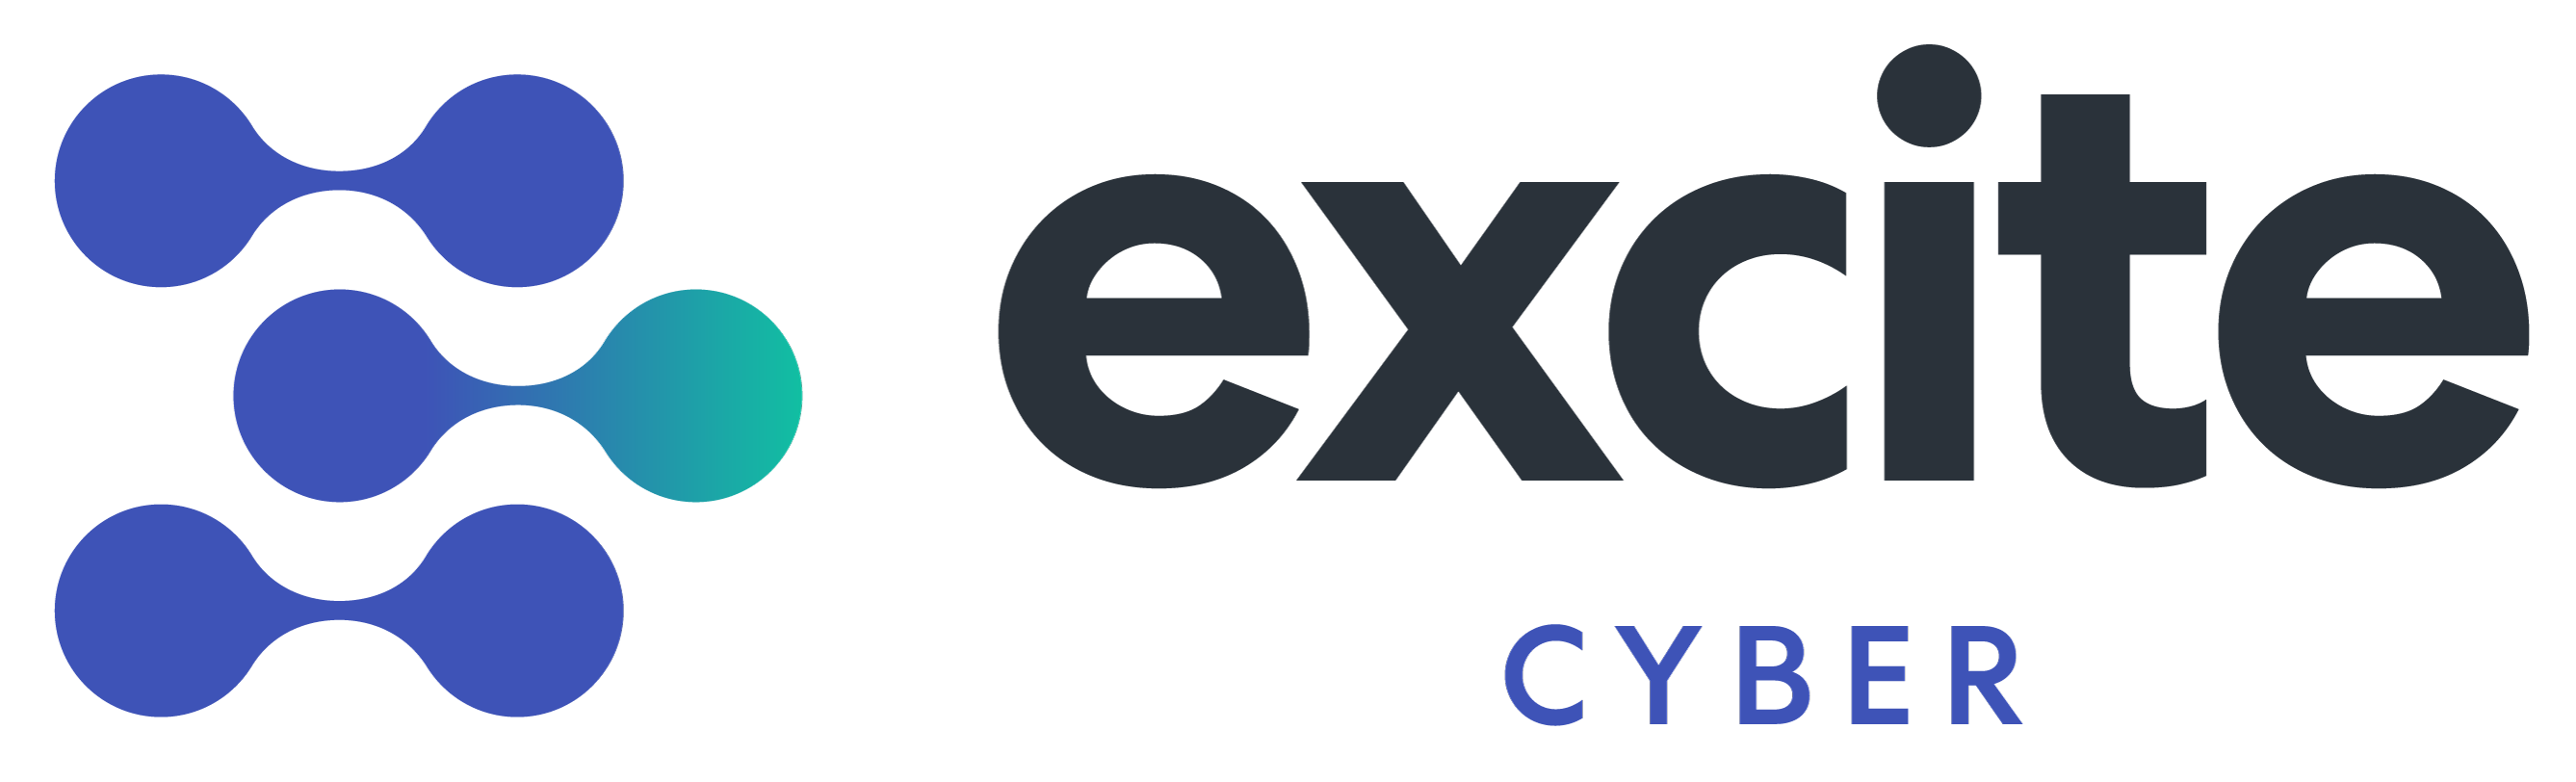 Excite Cyber